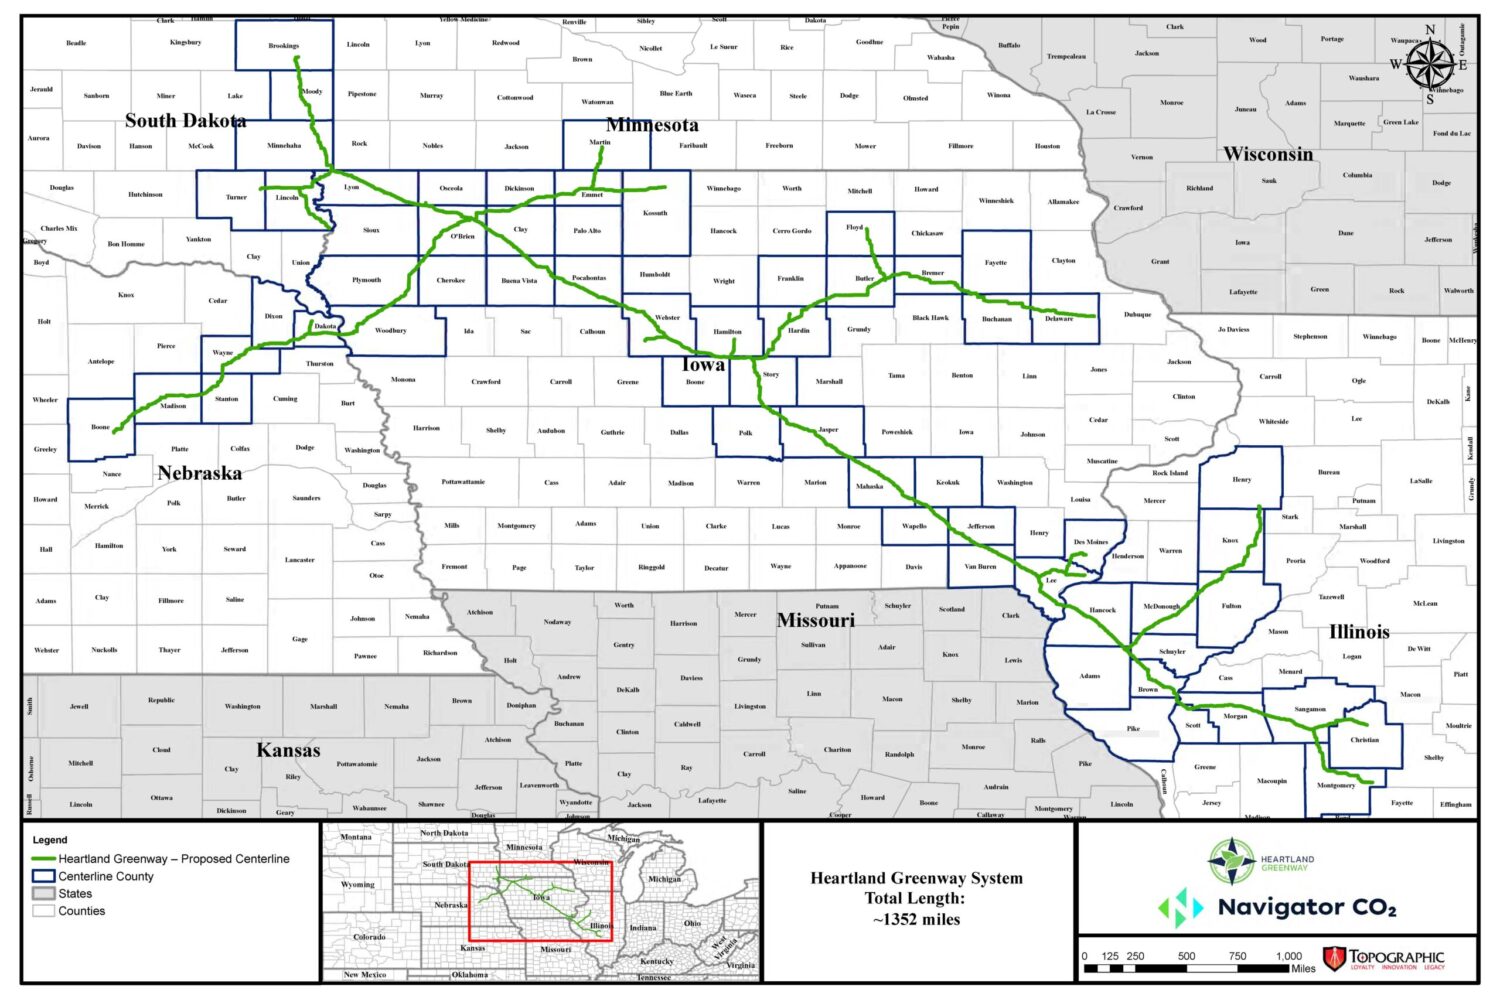 The route of the proposed Heartland Greenway pipeline. Map courtesy of Navigator CO2